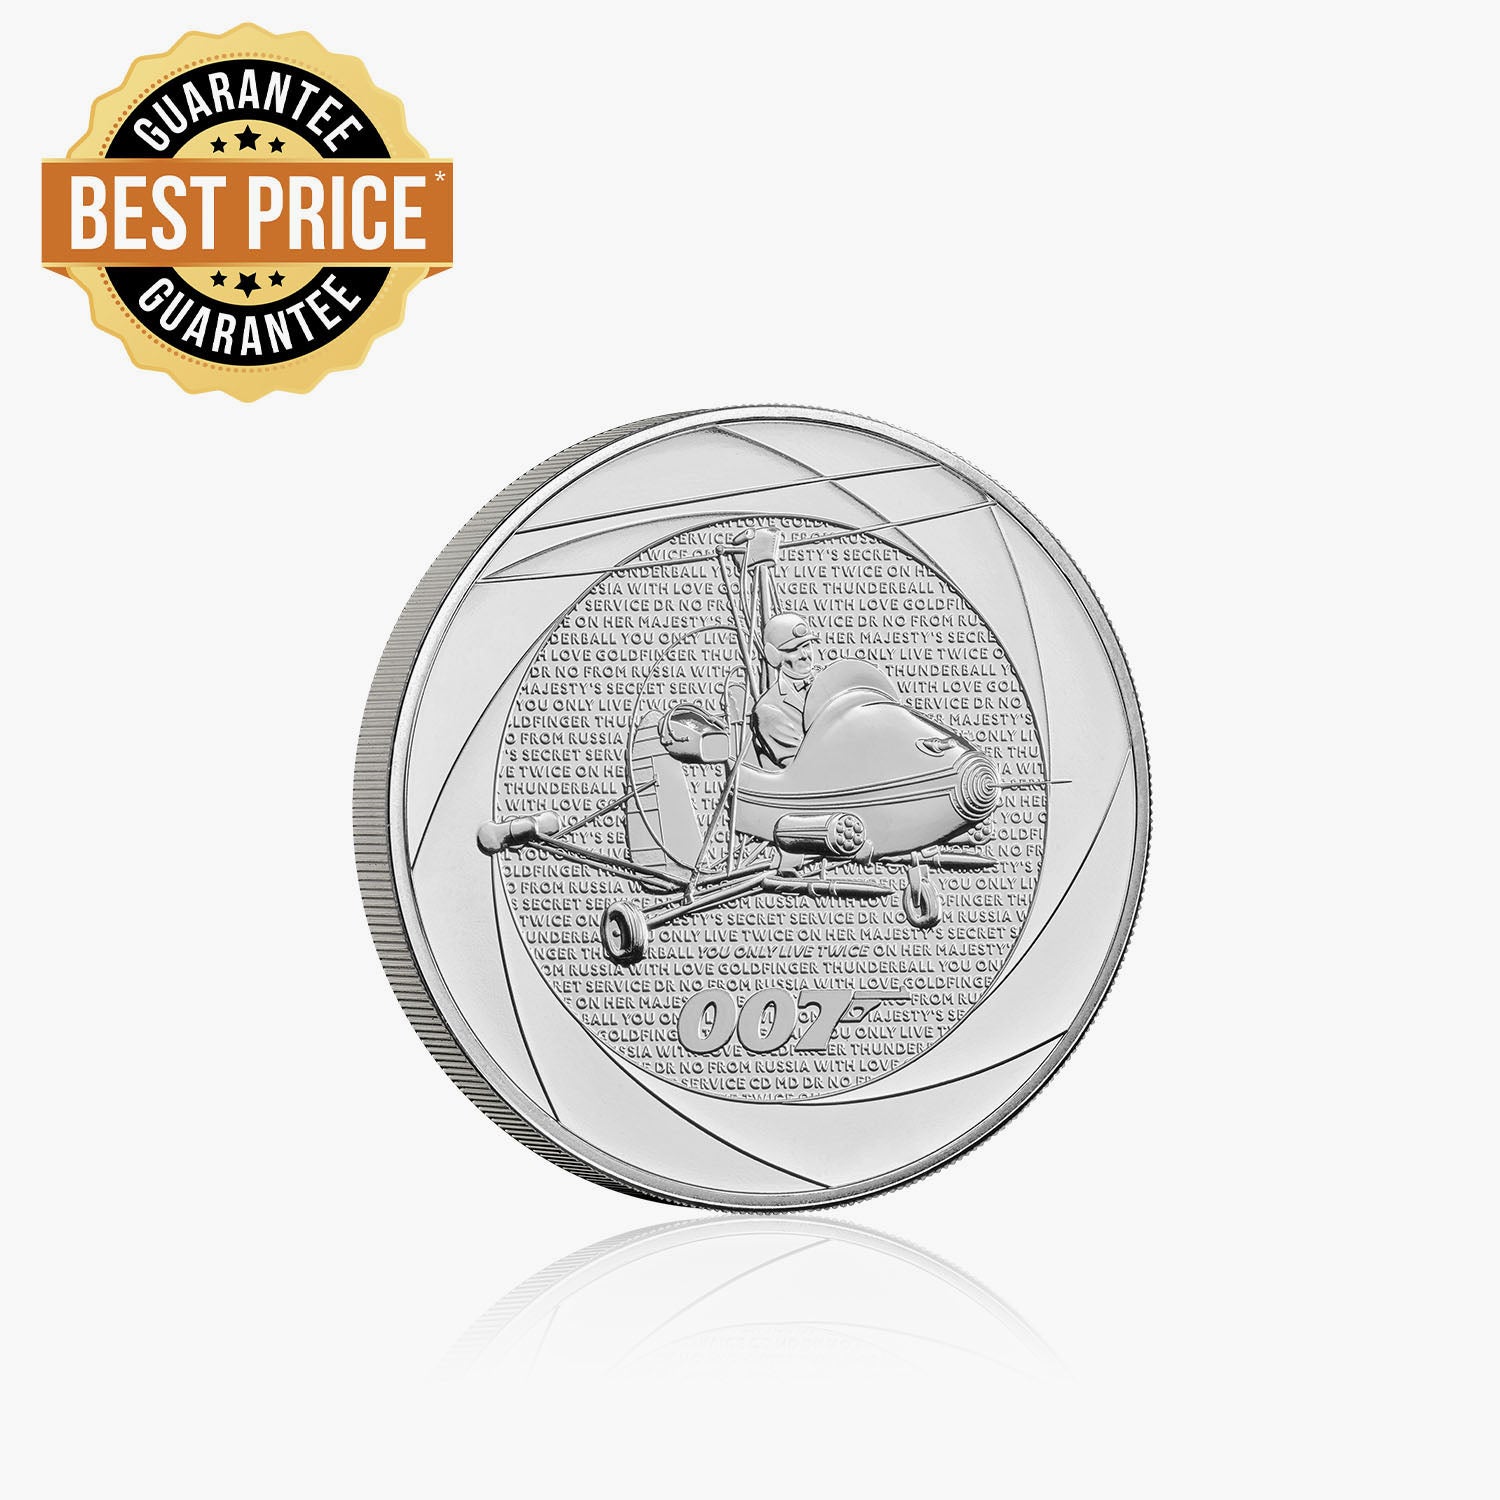 James Bond 007 'You Only Live Twice' 2023 £5 Coin